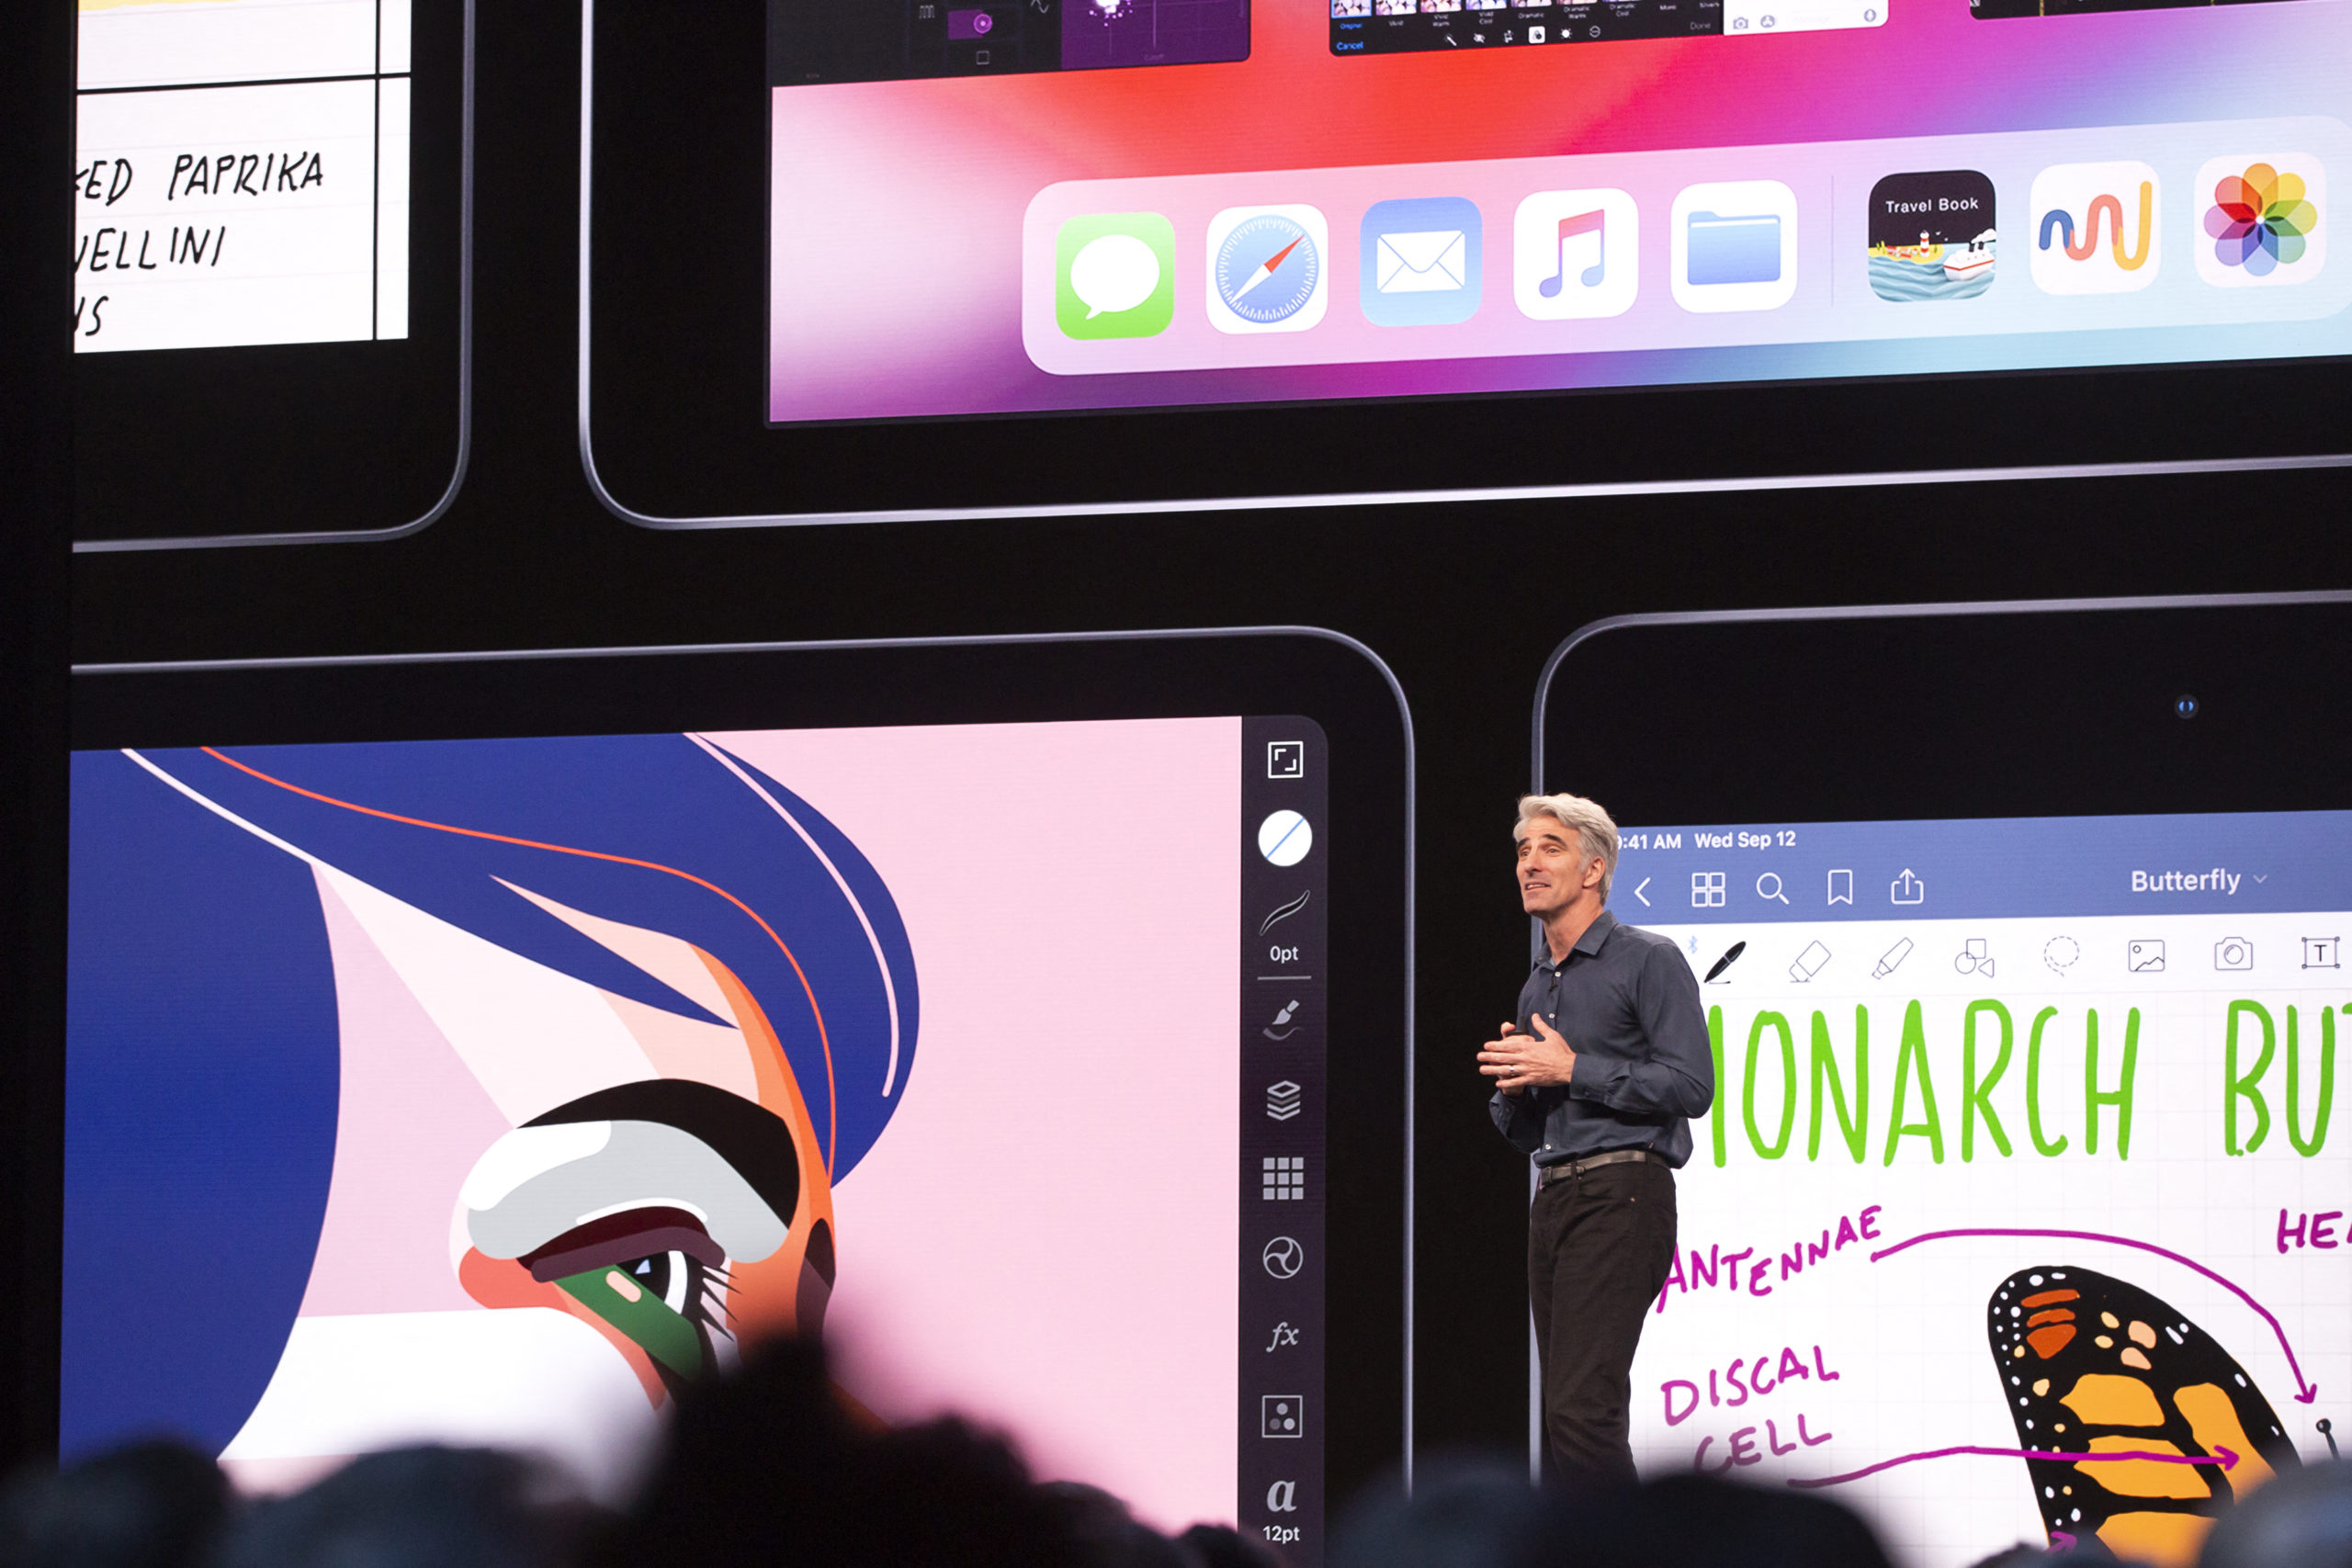 Apple's senior vice president of Software Engineering Craig Federighi speaks during Apple's Worldwide Developer Conference (WWDC) in San Jose, California on June 3, 2019. (Photo by Brittany Hosea-Small / AFP)